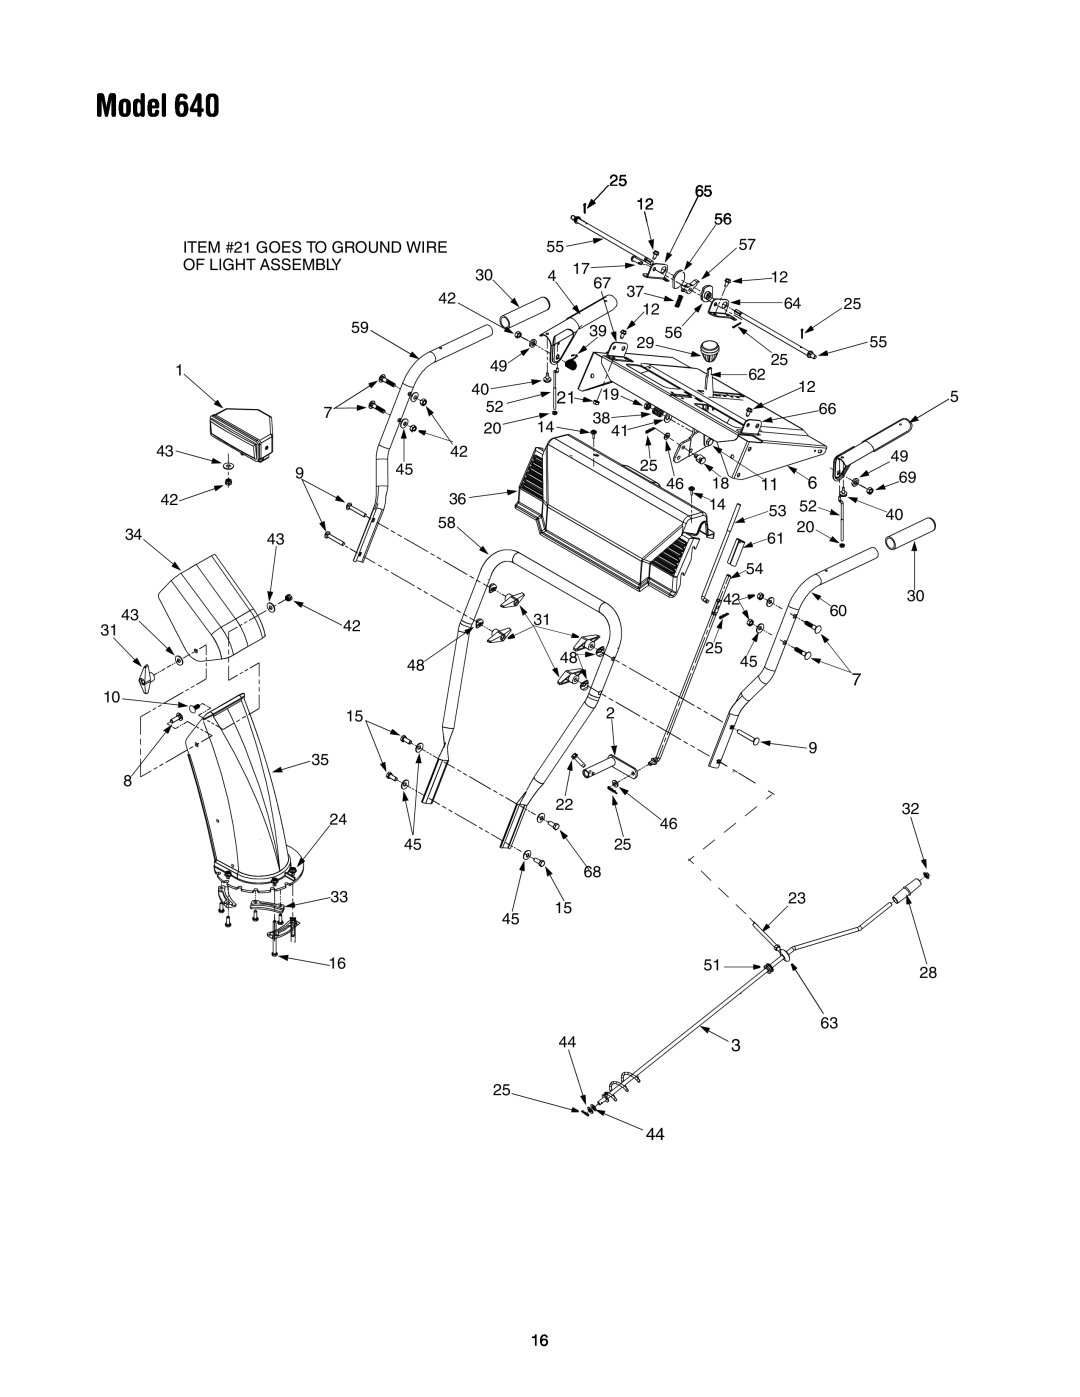 MTD 640 manual Model, ITEM #21 GOES TO GROUND WIRE, Of Light Assembly 